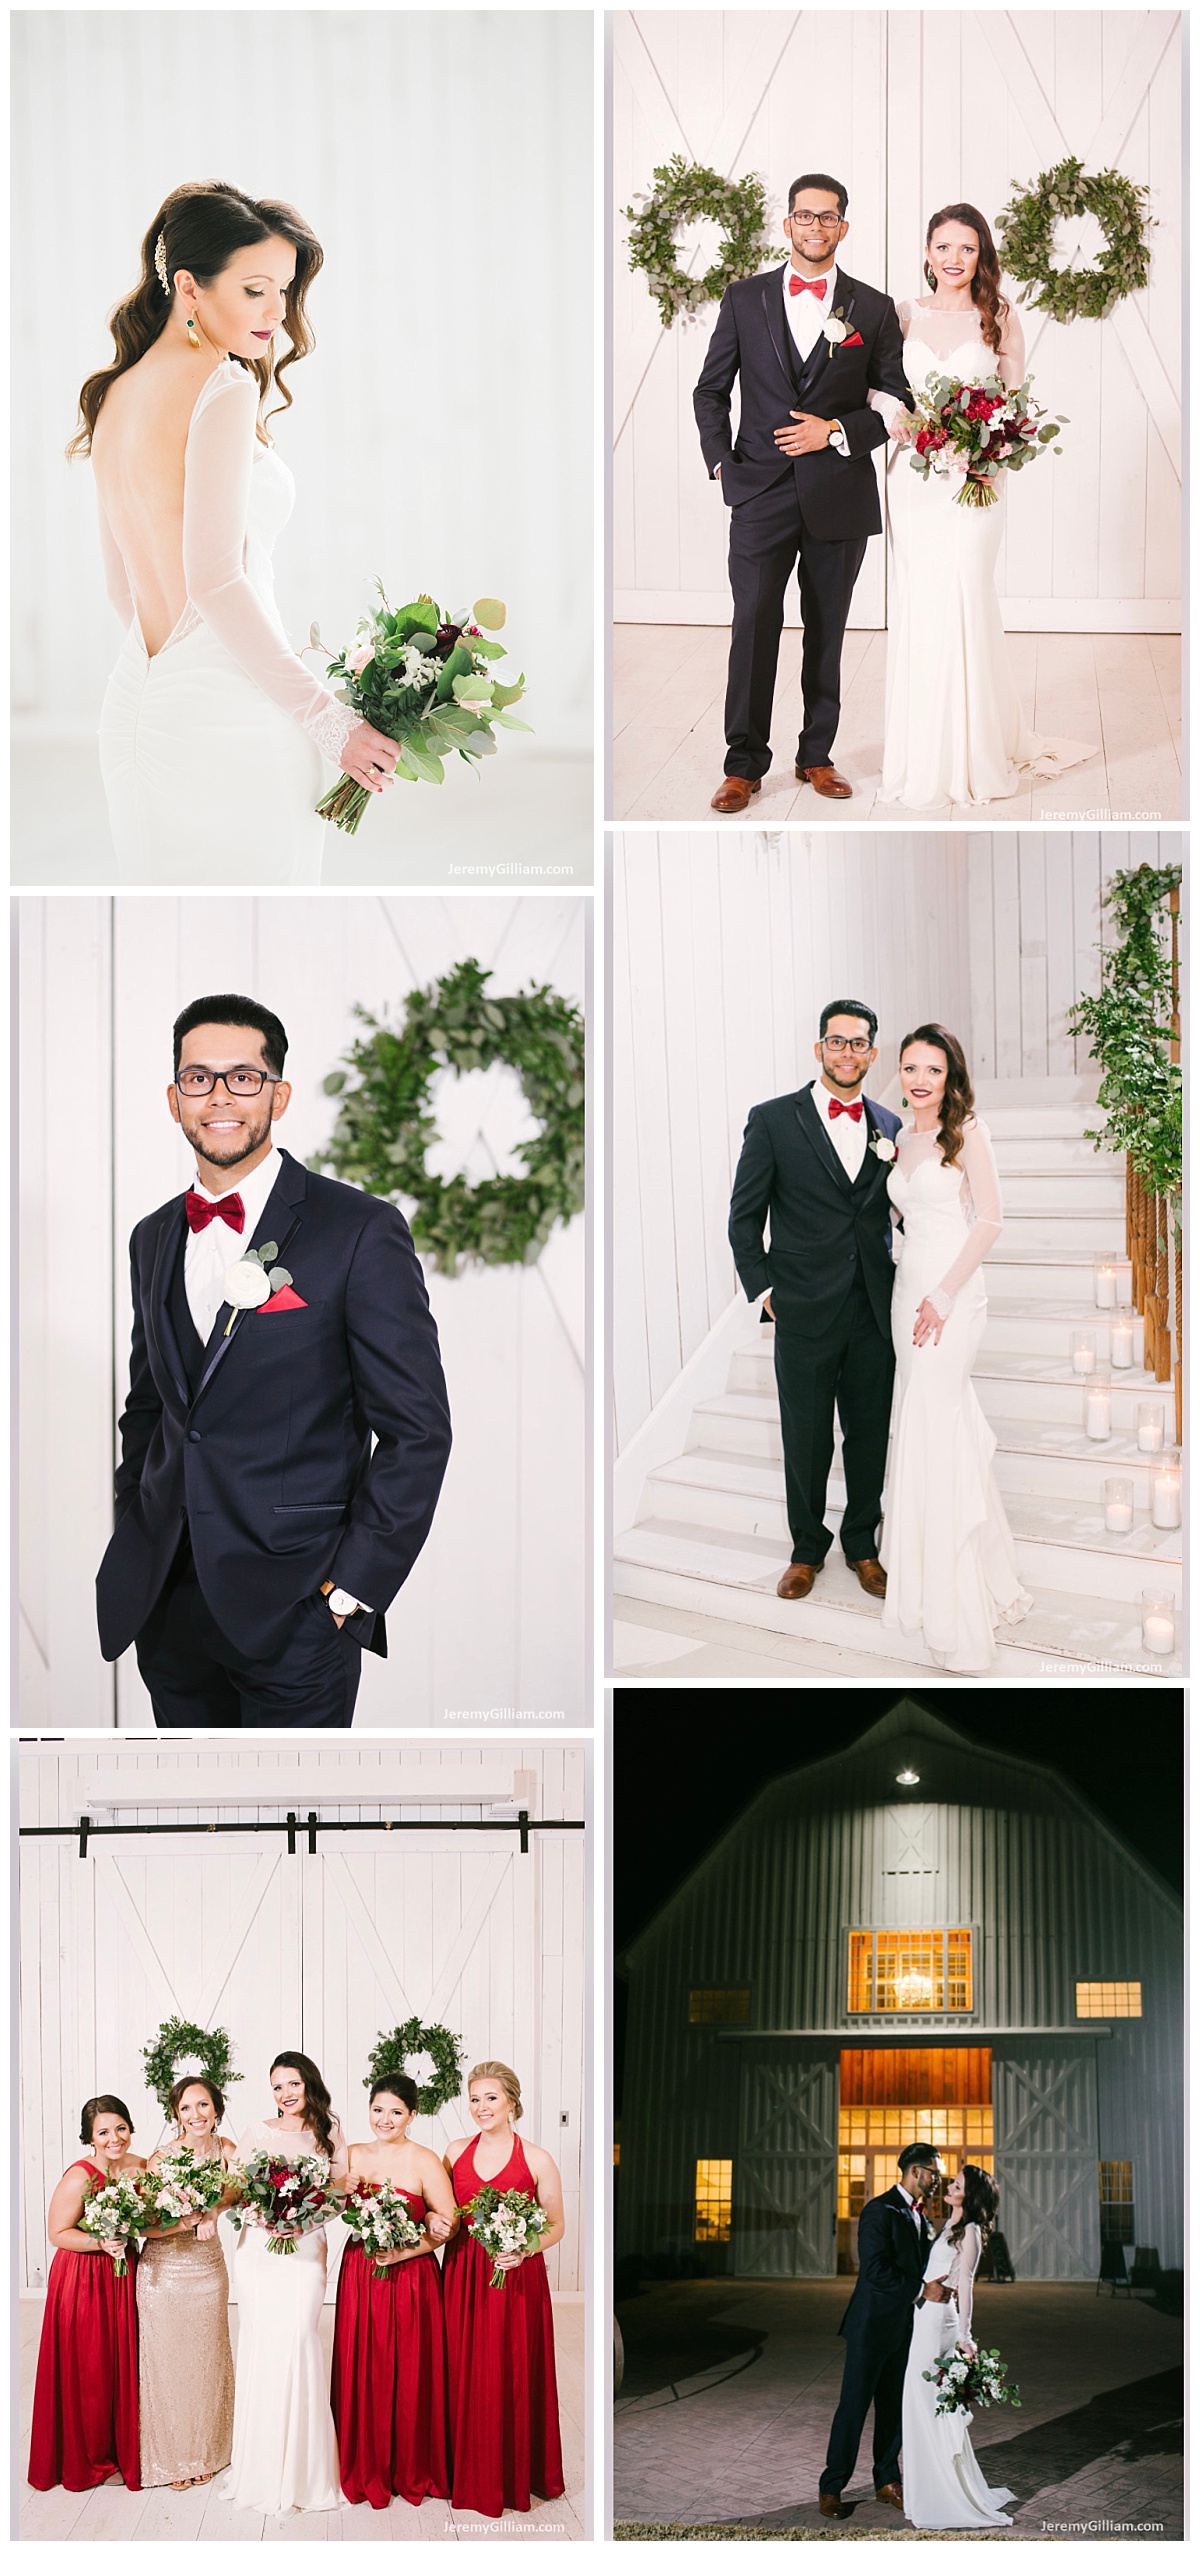 Jeremy Gilliam Photography, Dallas Wedding, Plano Wedding, Frisco Wedding, The White Sparrow Wedding, Winter Wedding, Spring Wedding, Wedding Flowers, red and green flowers, traditional wedding Flowers,  A  & L Floral Design